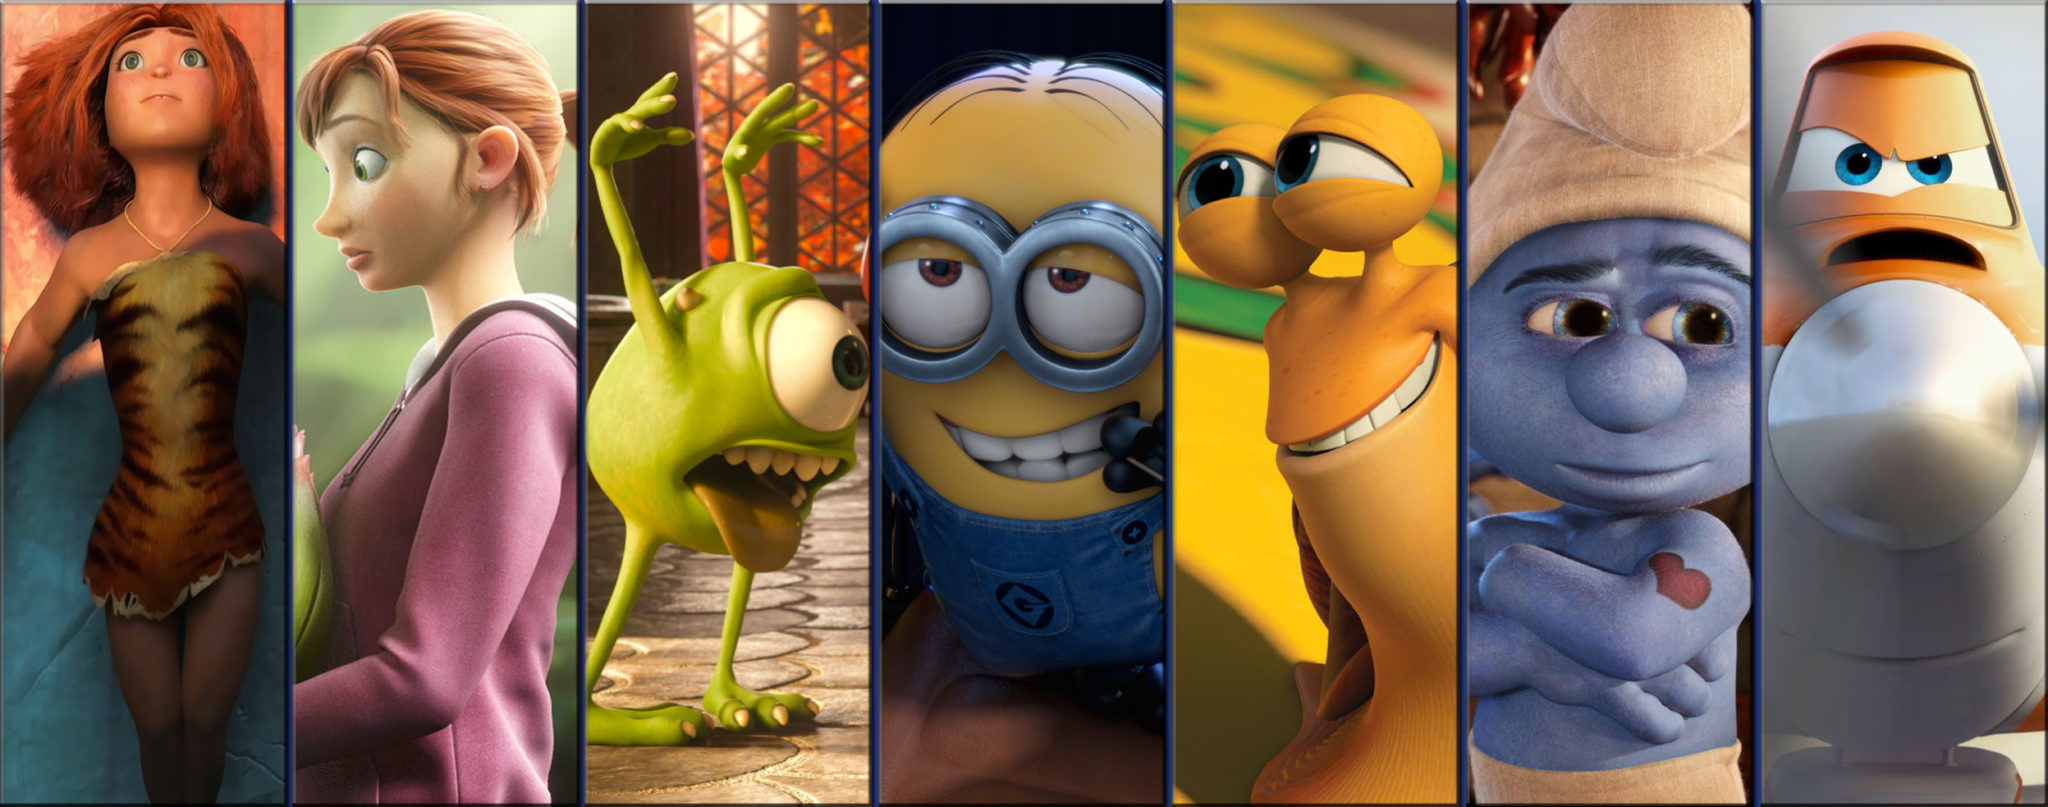 Is There Really Such a Thing as 'Too Many' Animated Films? - Rotoscopers